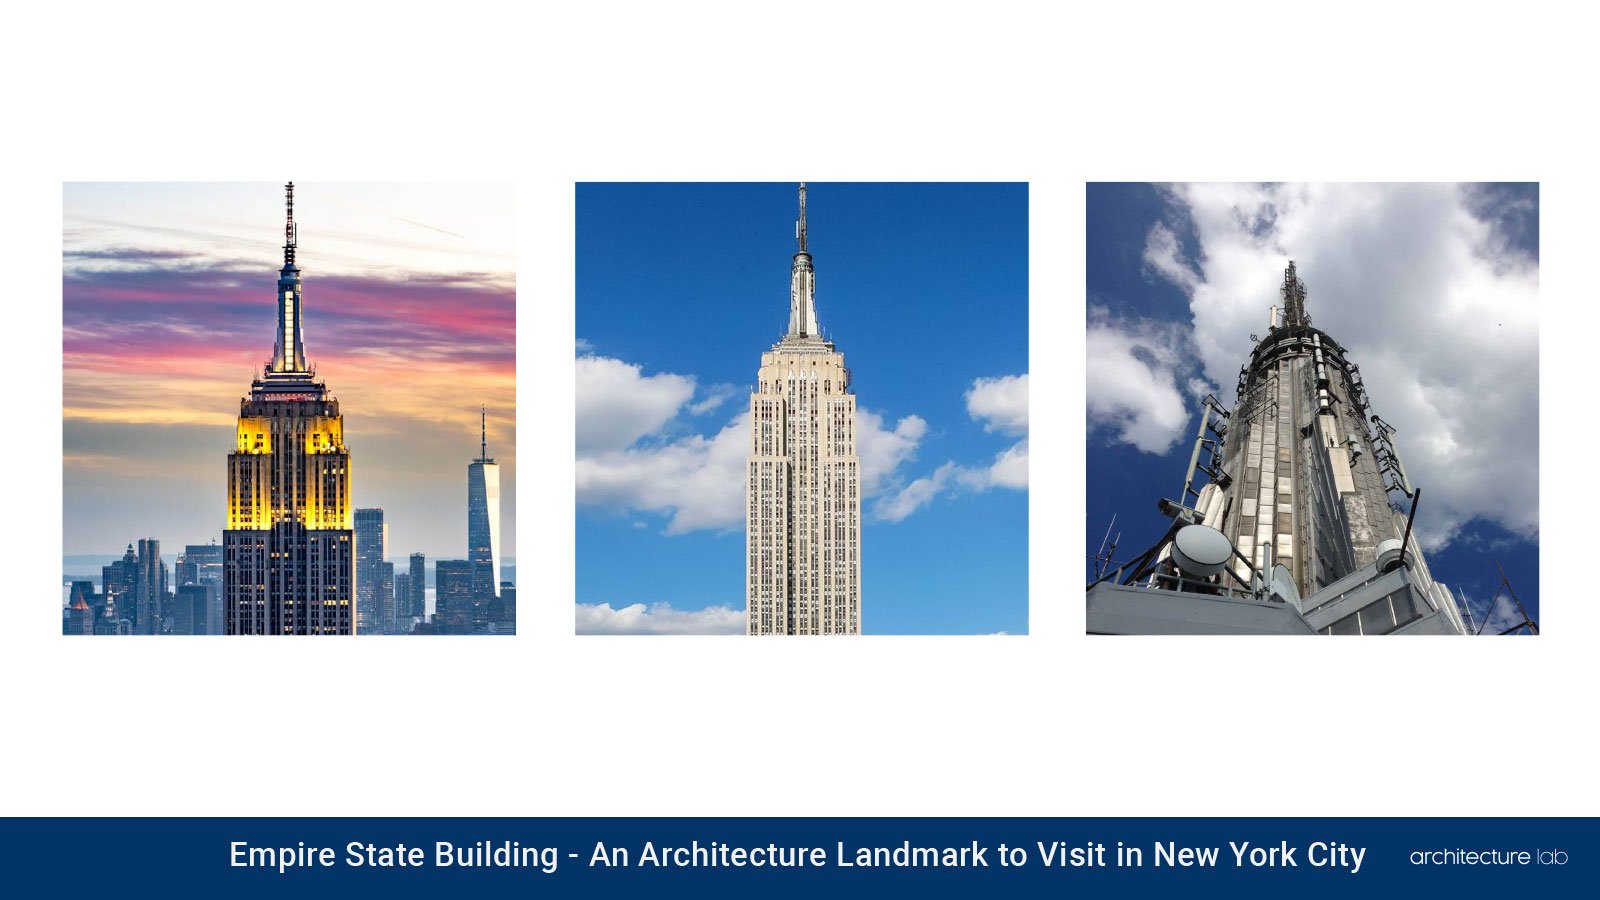 Empire state building: an architecture landmark to visit in new york city